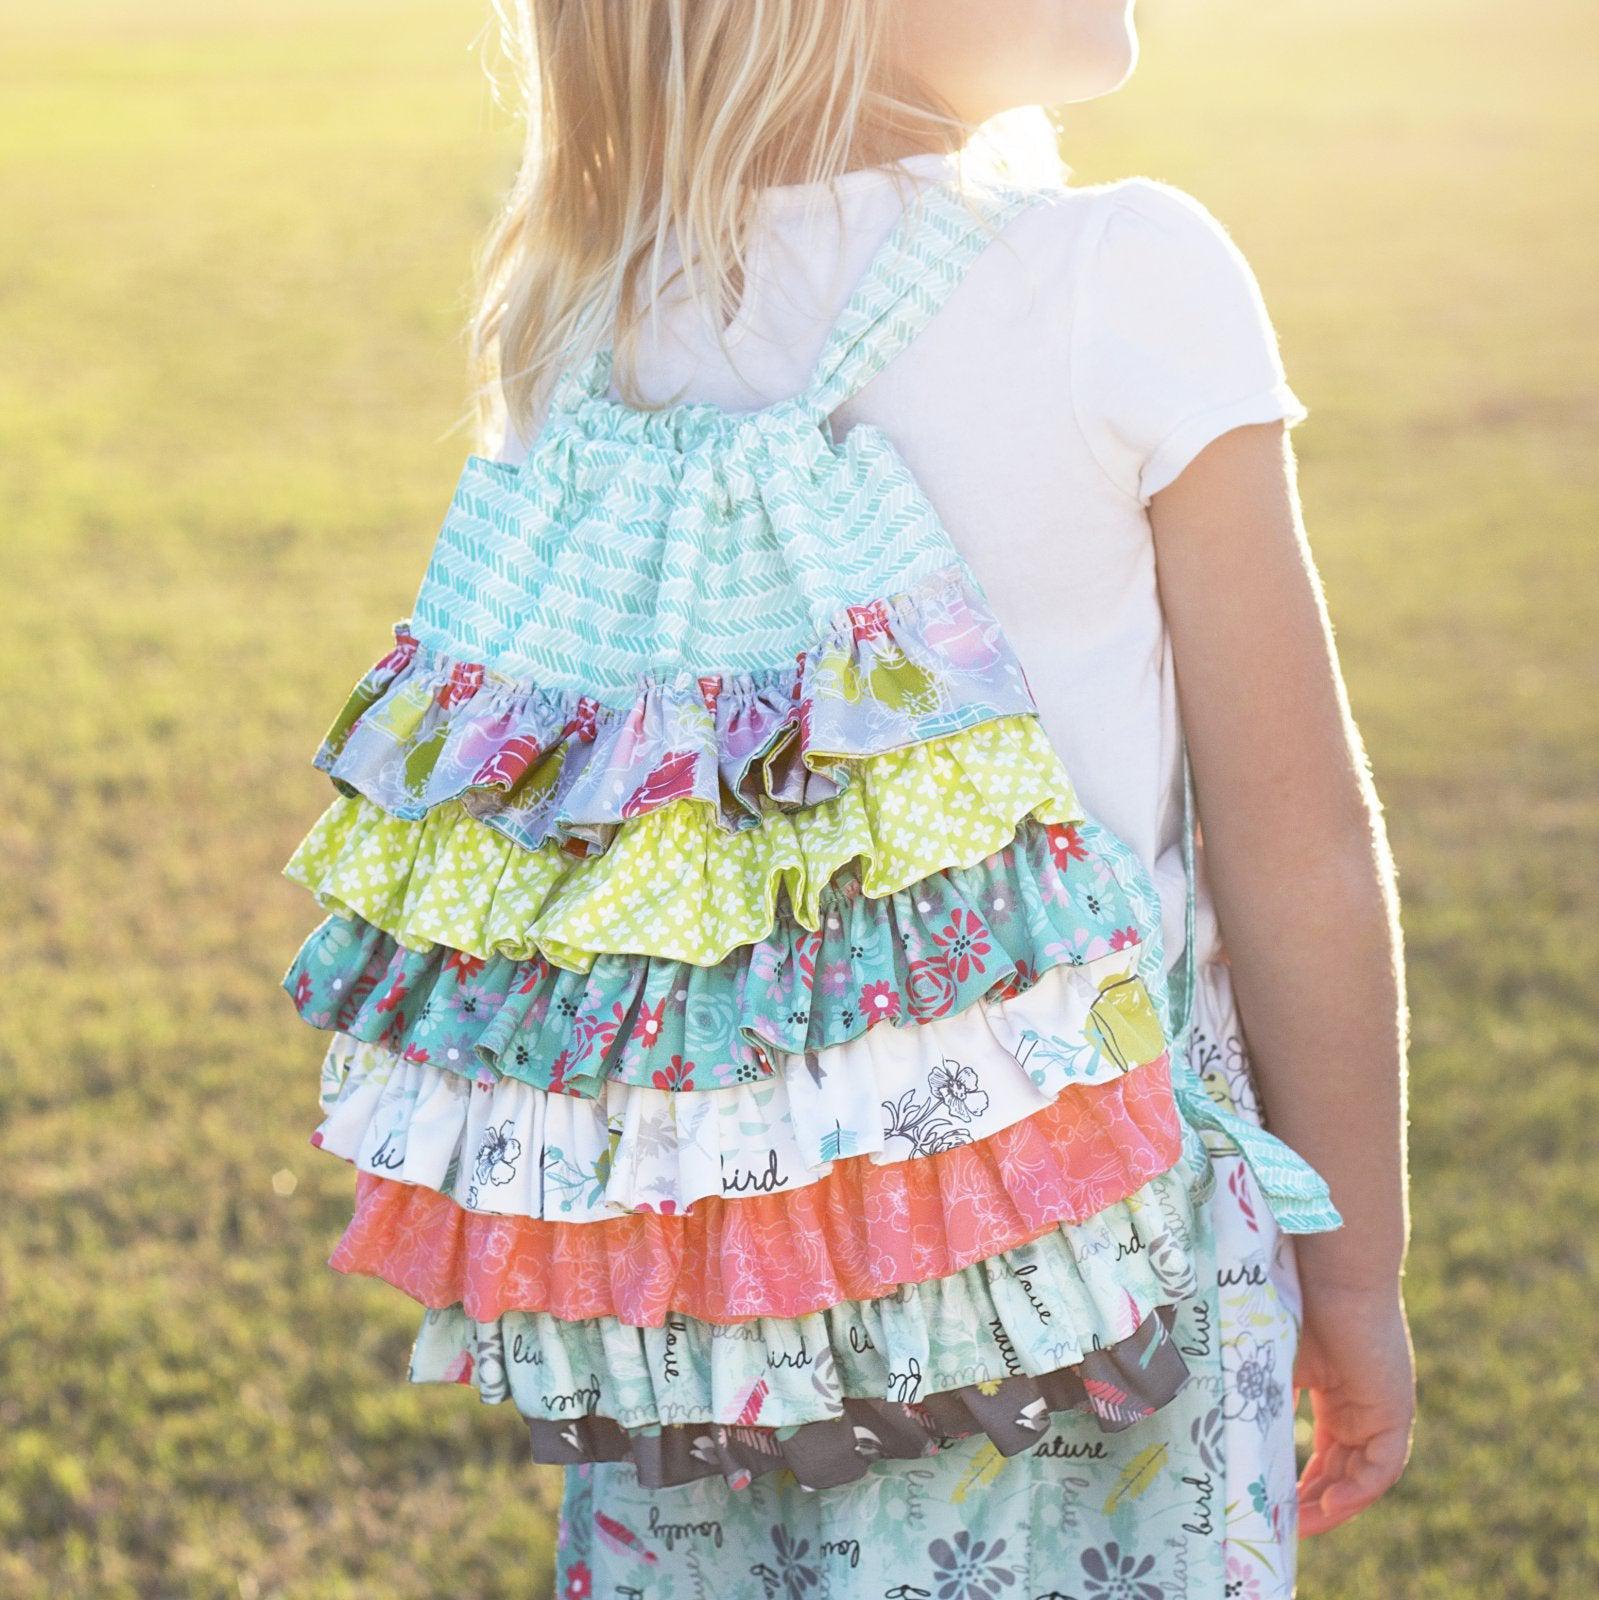 Ruffled Backpack Pattern - Free Pattern Download-3 Wishes Fabric-My Favorite Quilt Store